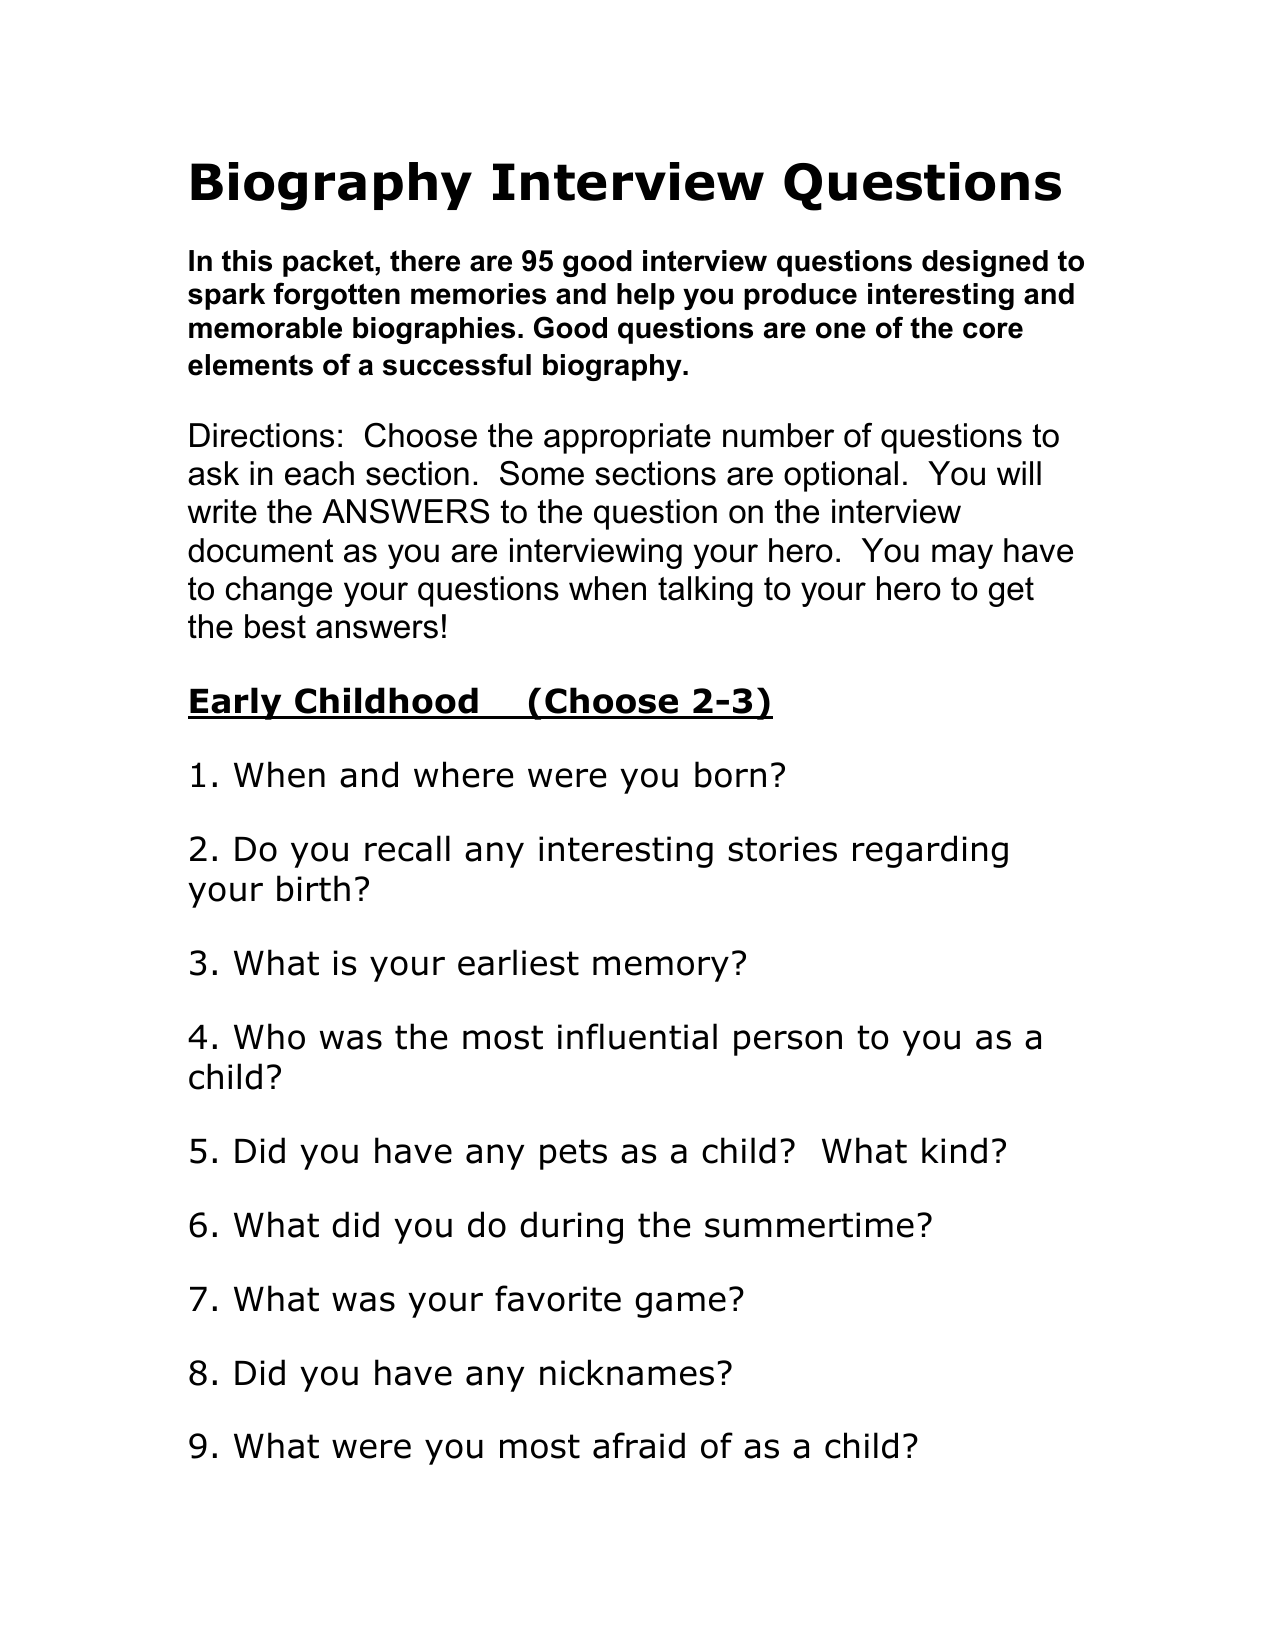 early life biography questions